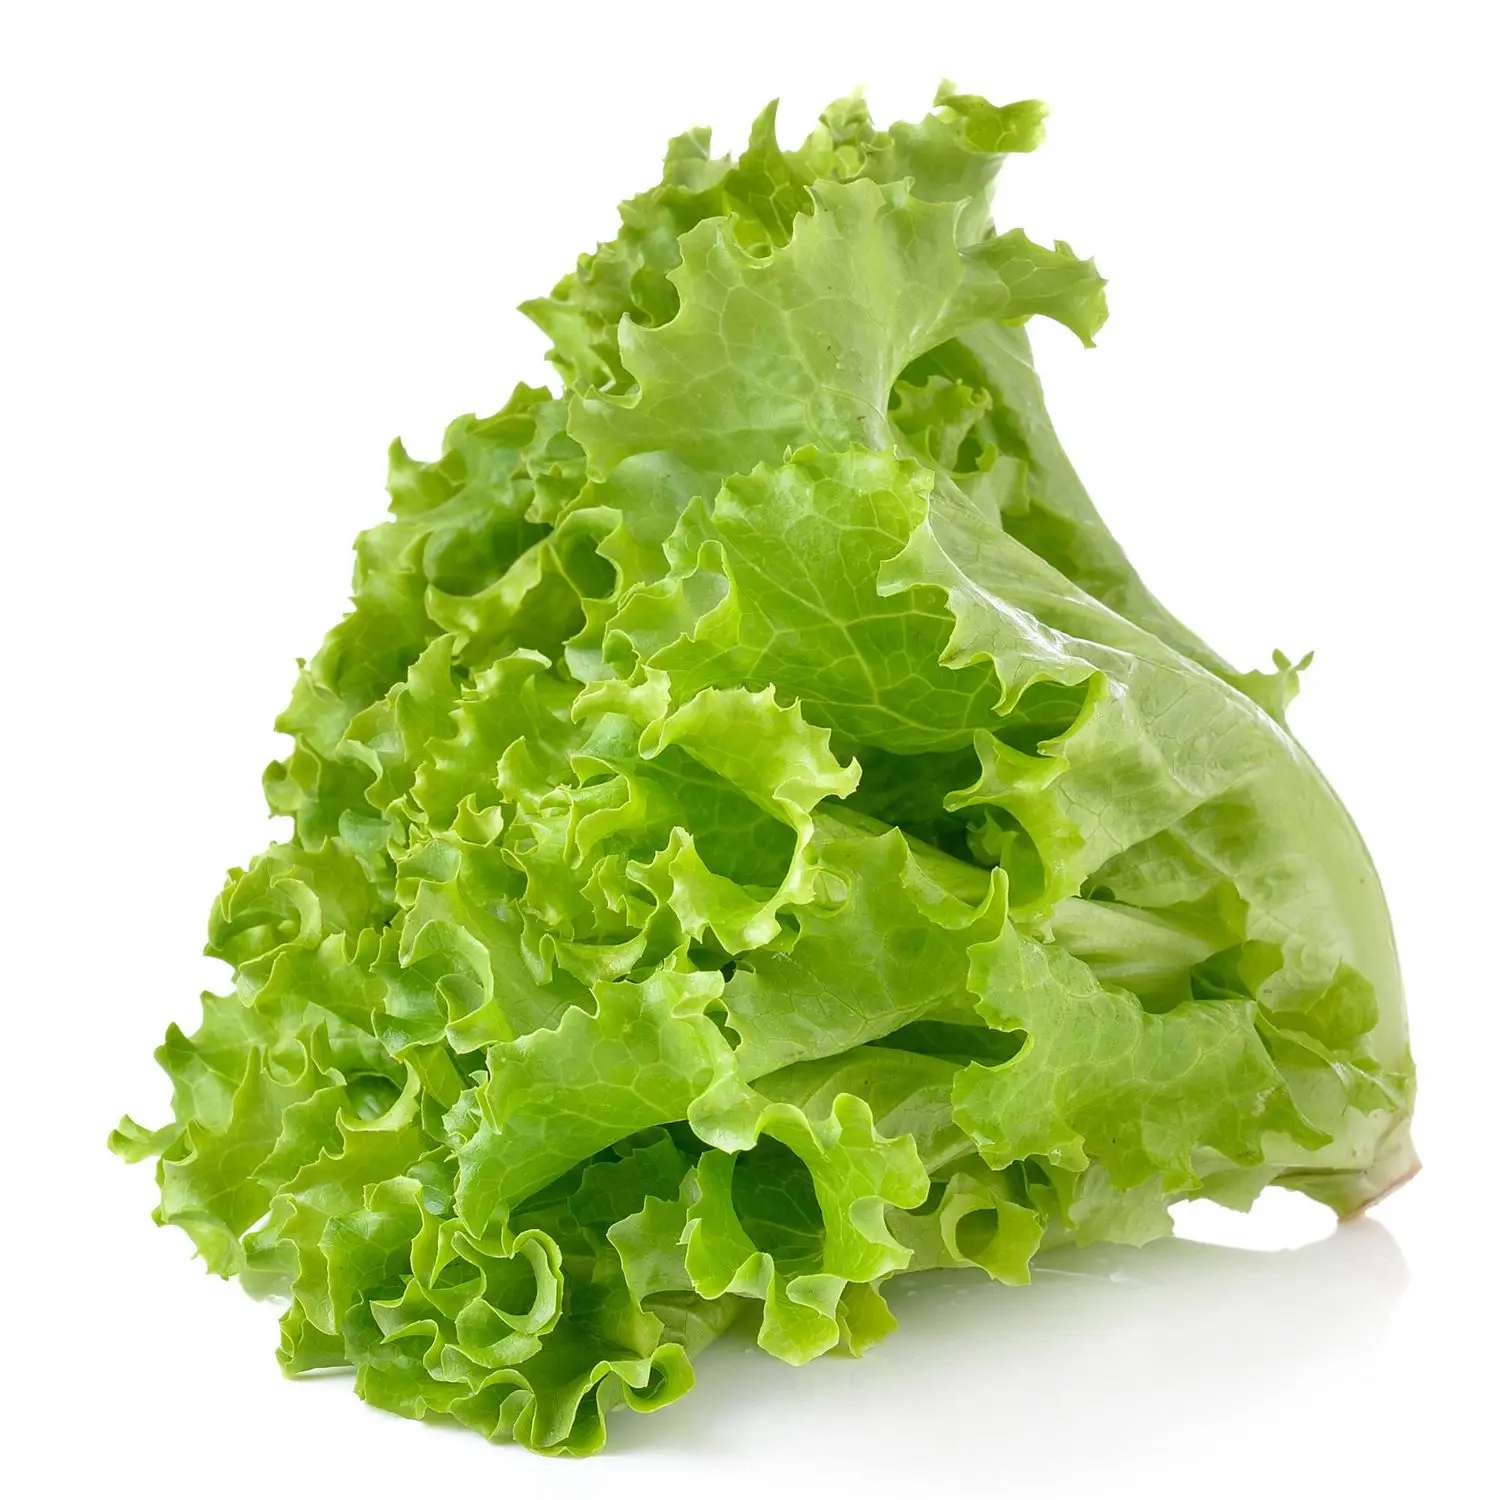 Factory Supply Green Leaf Lettuce Green Salad Romaine Lettuce Seeds For Growing Buy High Quality Green Leaf Lettuce Seeds High Germination Rate Green Salad Seeds Wholesale Romaine Lettuce Seeds Product On Alibaba Com